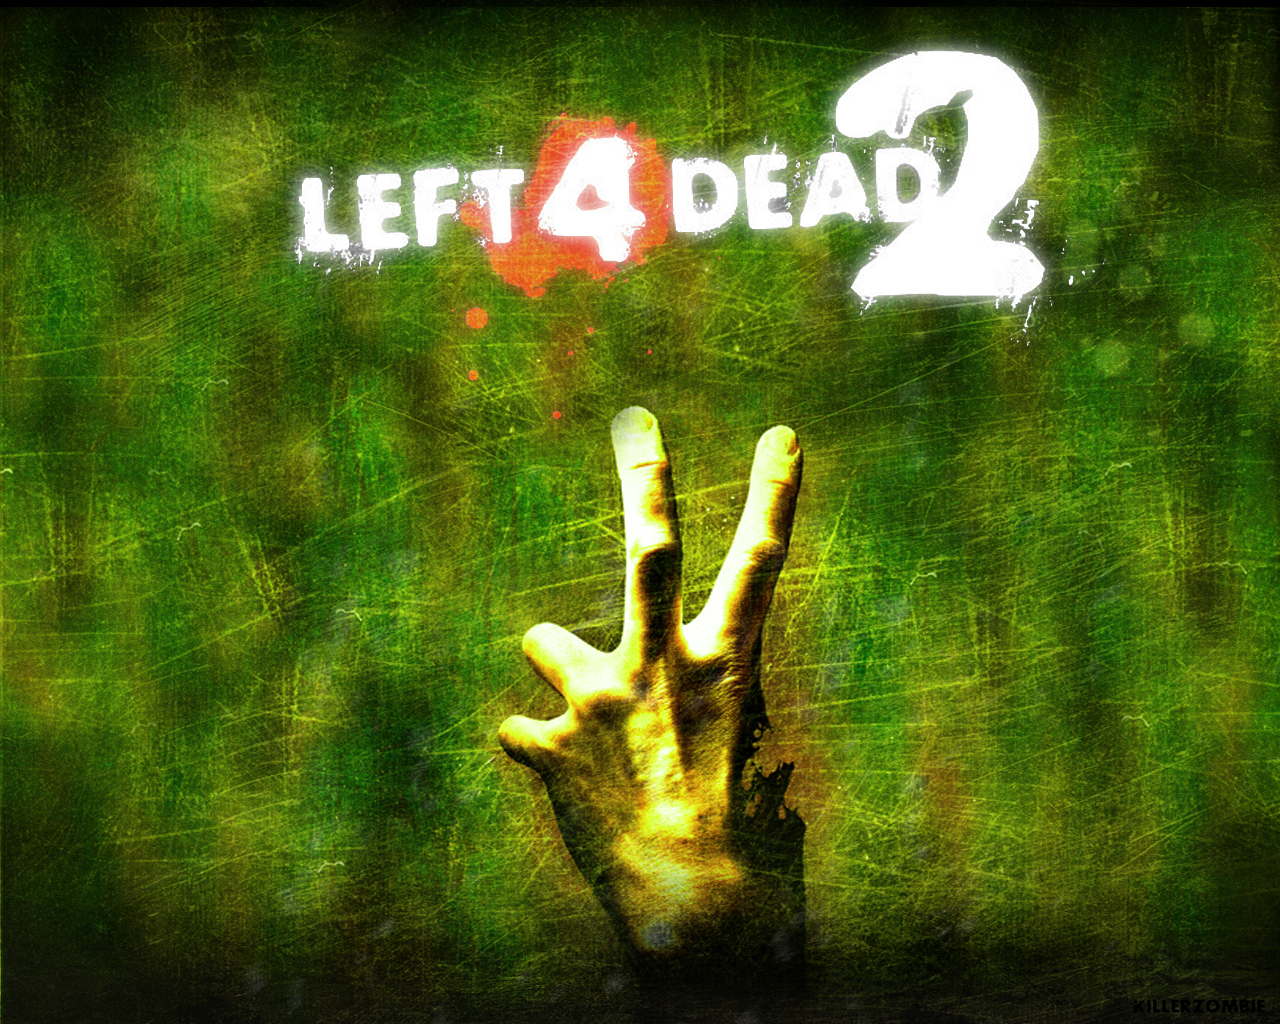 Left 4 Dead is back and it's better than ever!